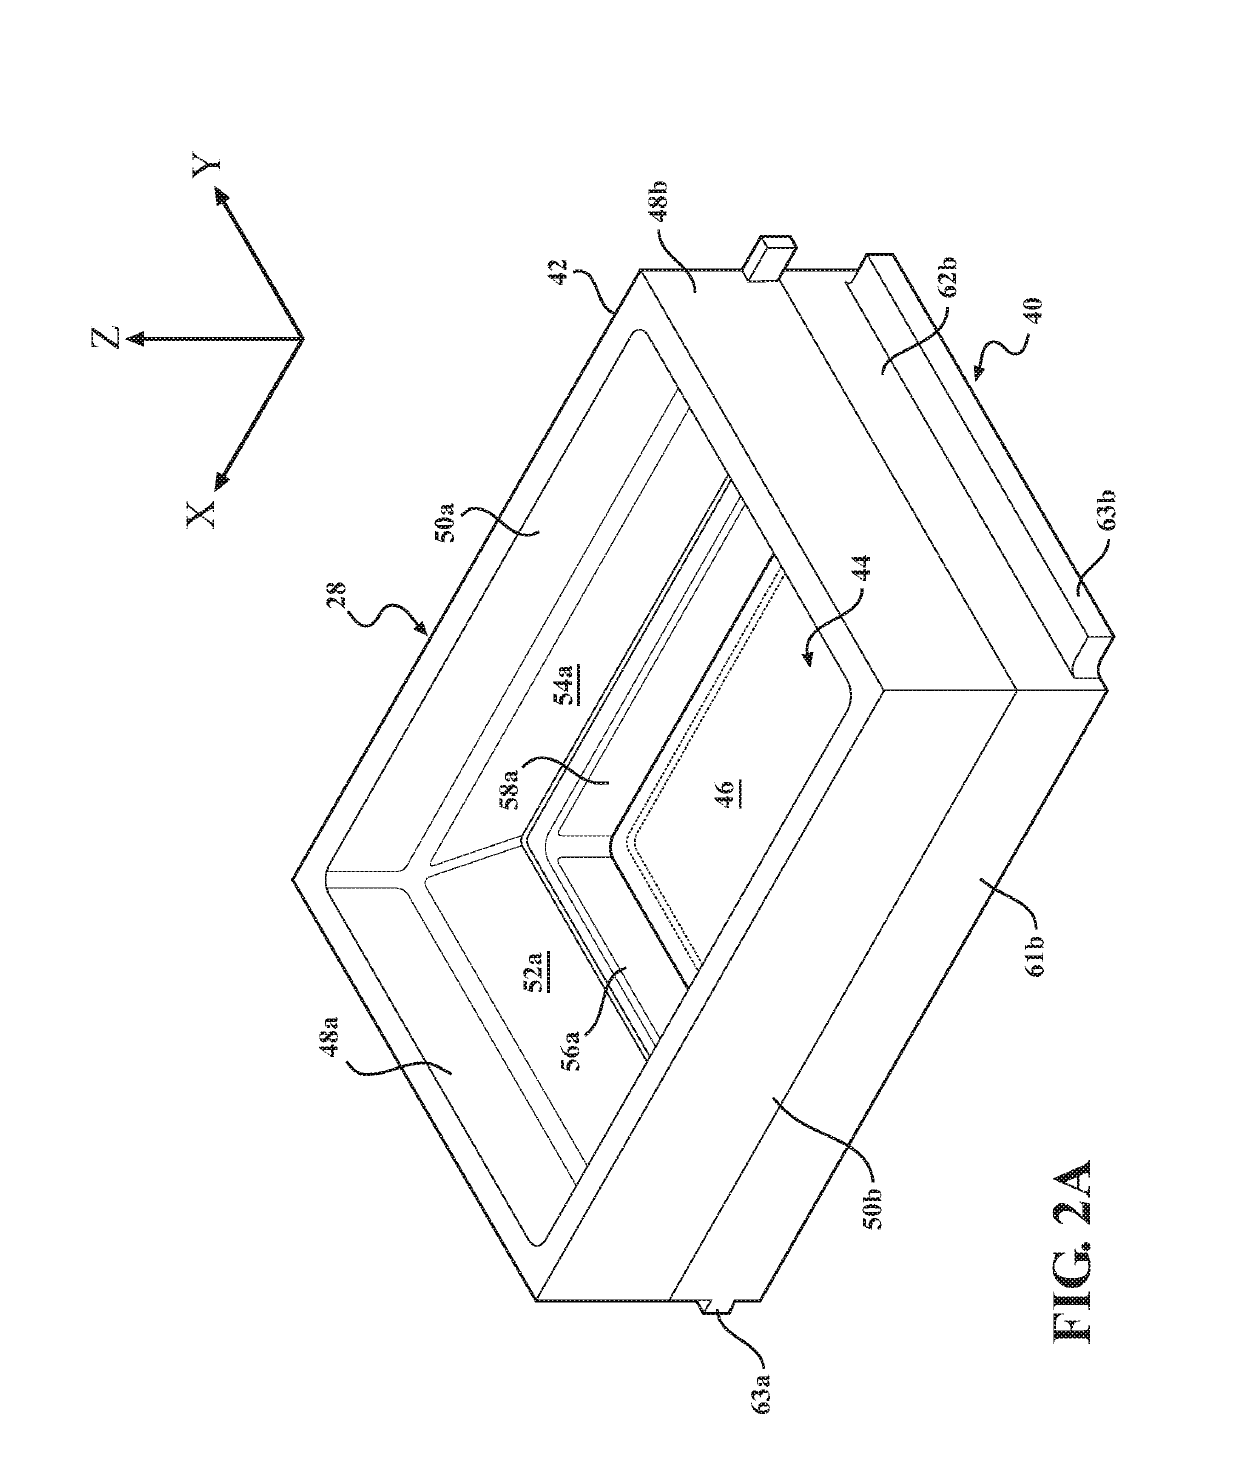 Method of stabilizing a photohardening inhibitor-permeable film in the manufacture of three-dimensional objects